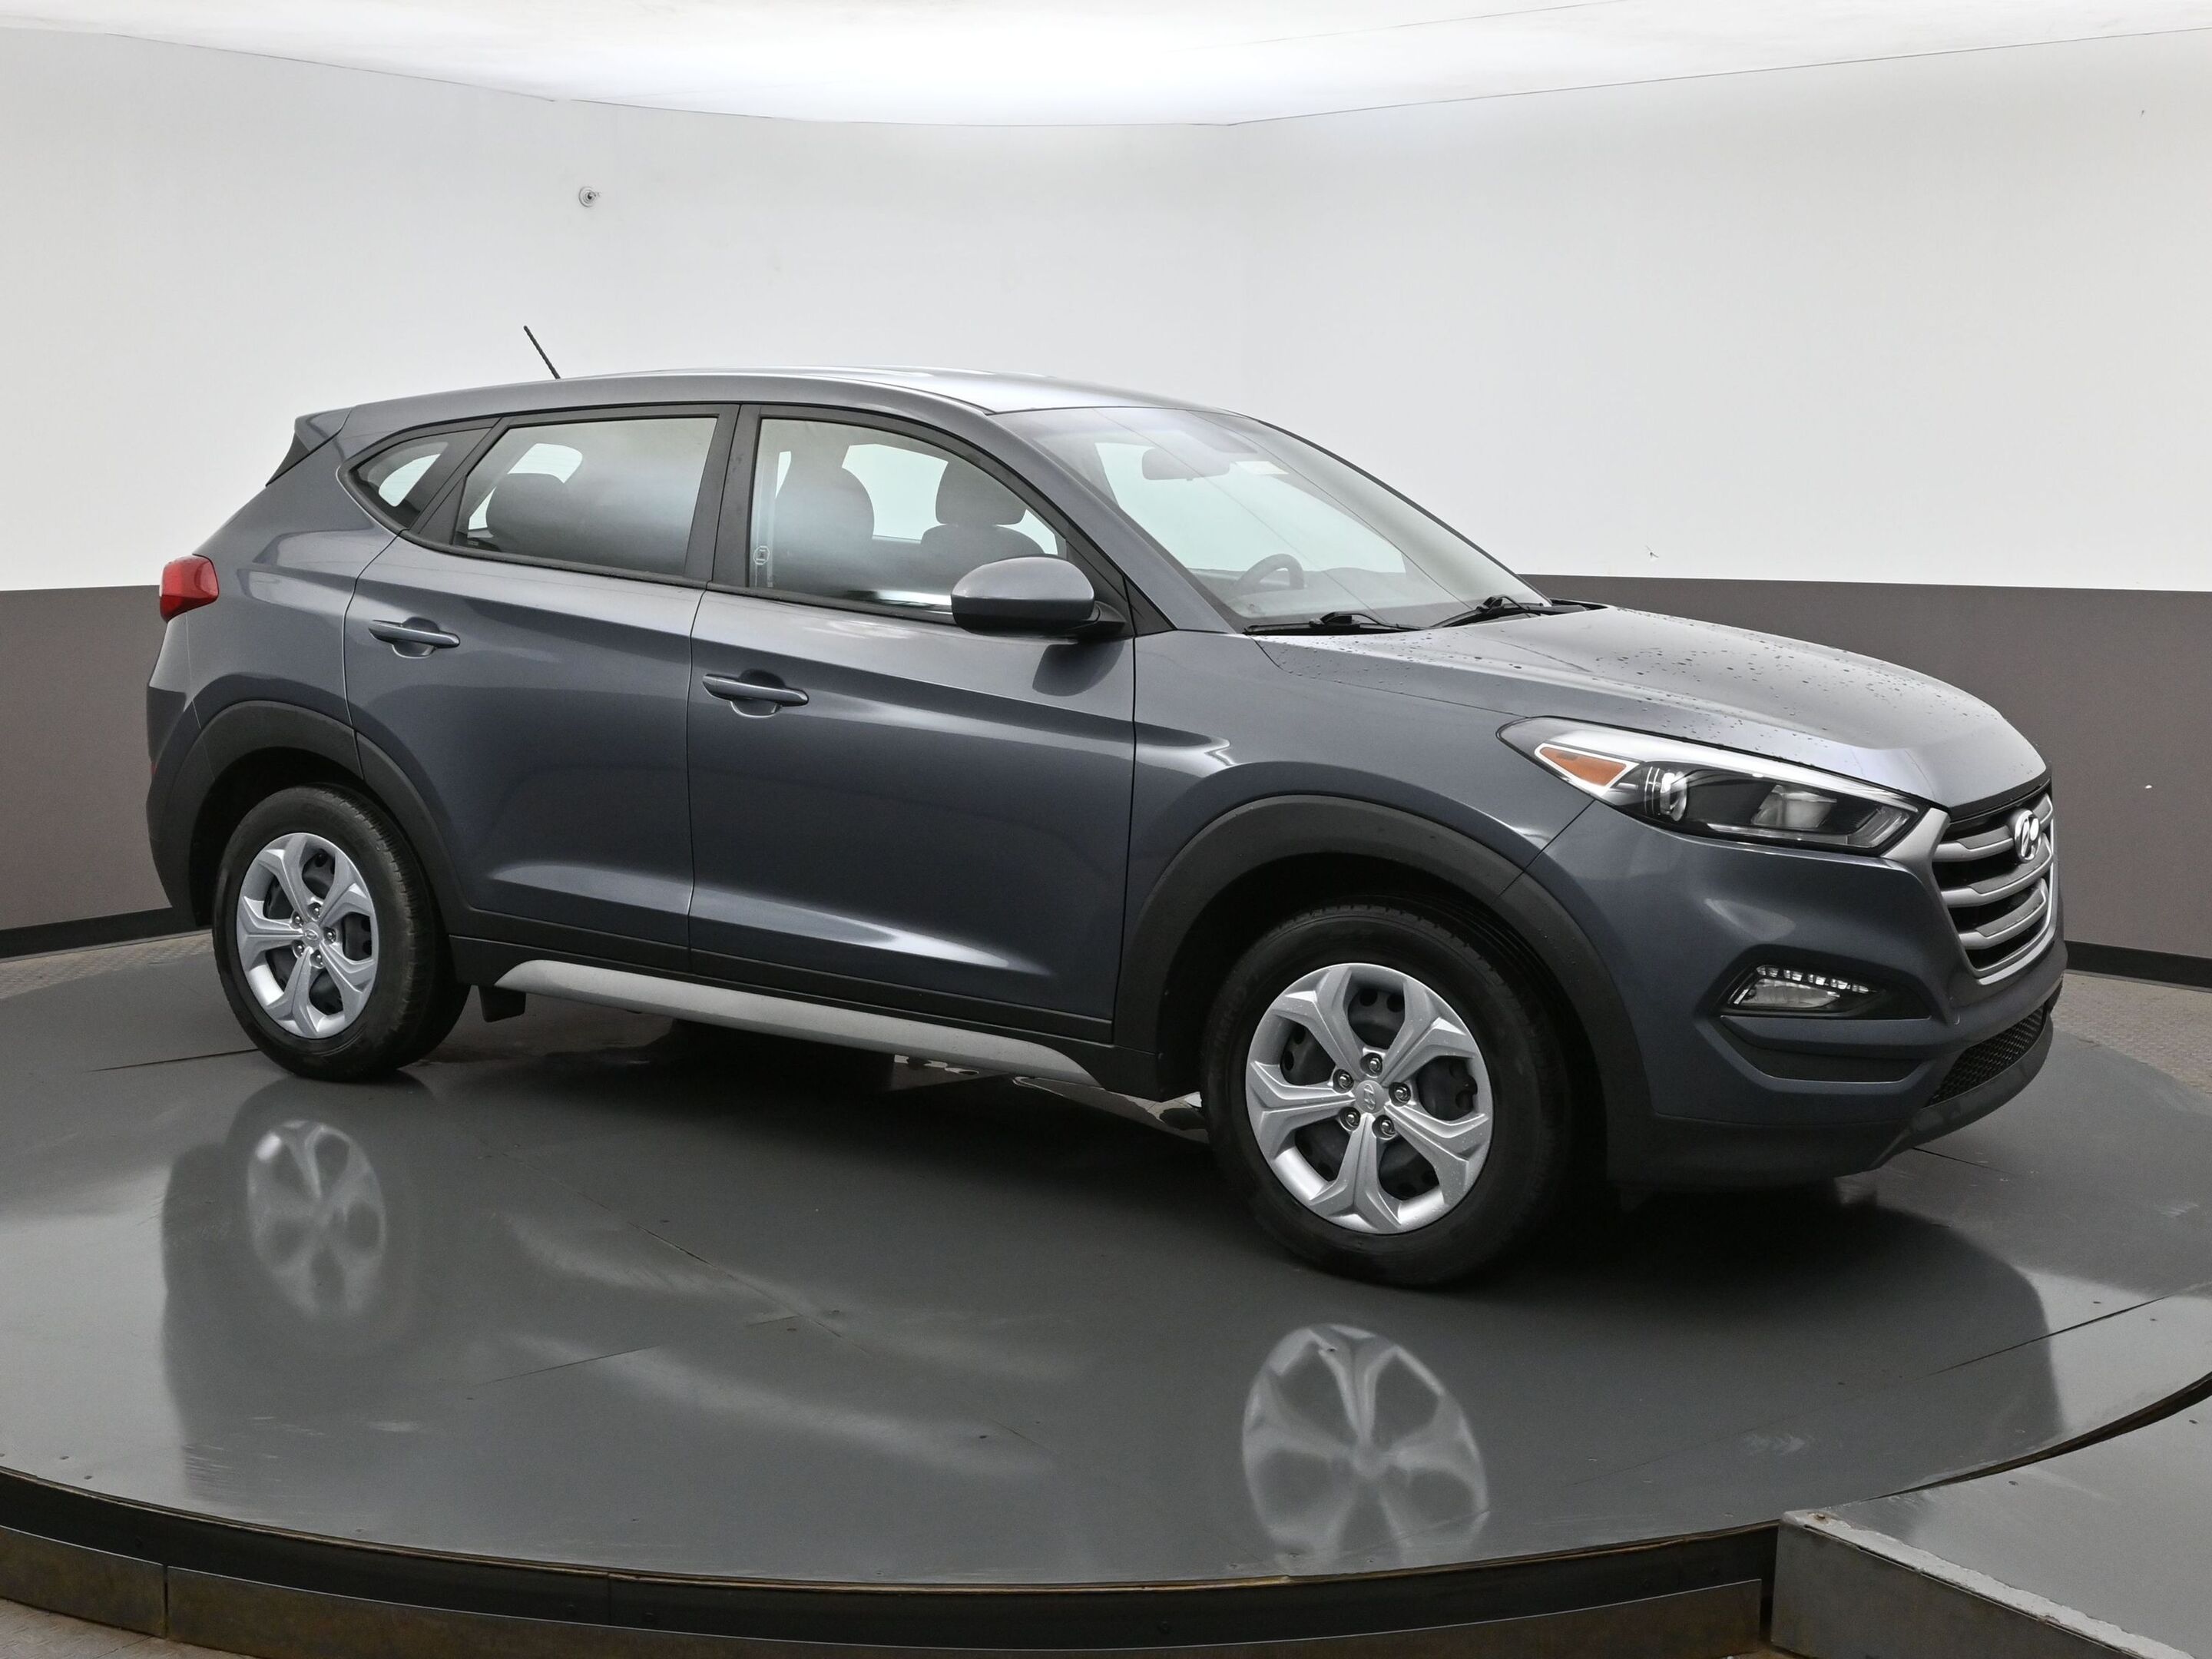 2018 Hyundai Tucson One Owner & Fully Certified GL, AWD, Bluetooth, He